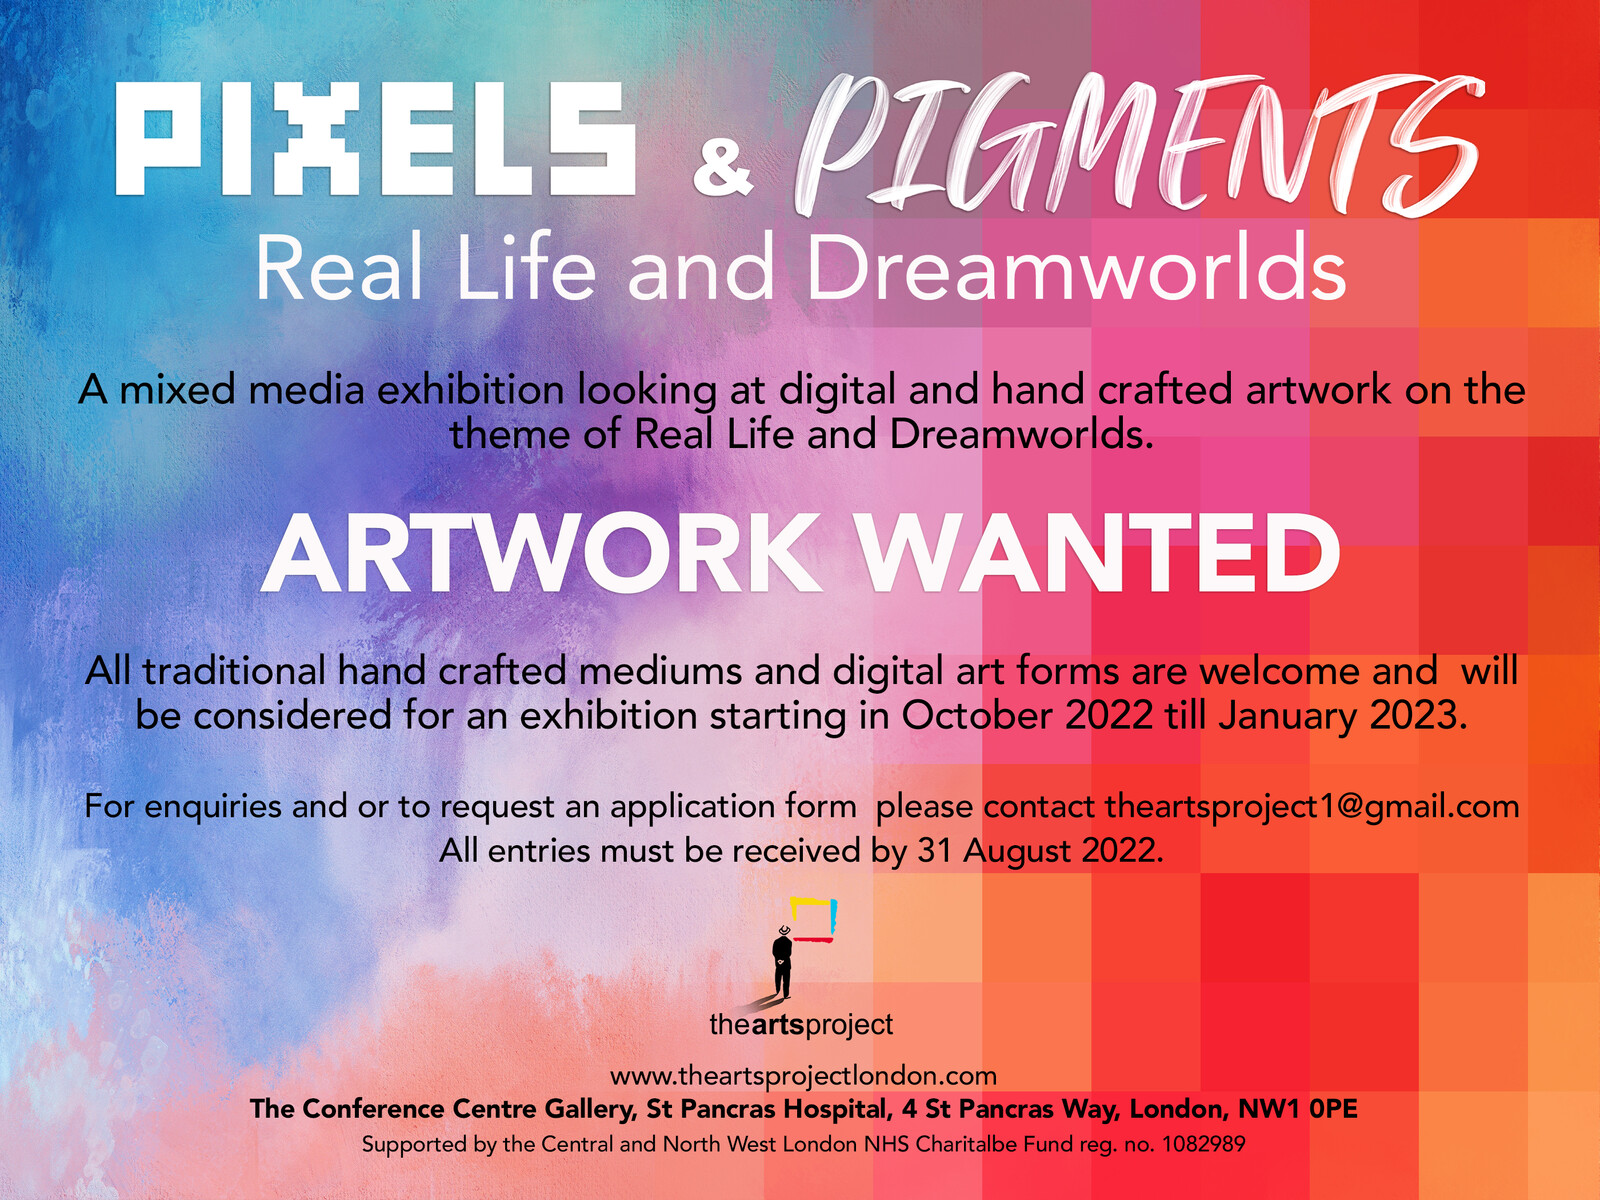 Bringing digital and analogue art together in Real Life and Dreamworlds.